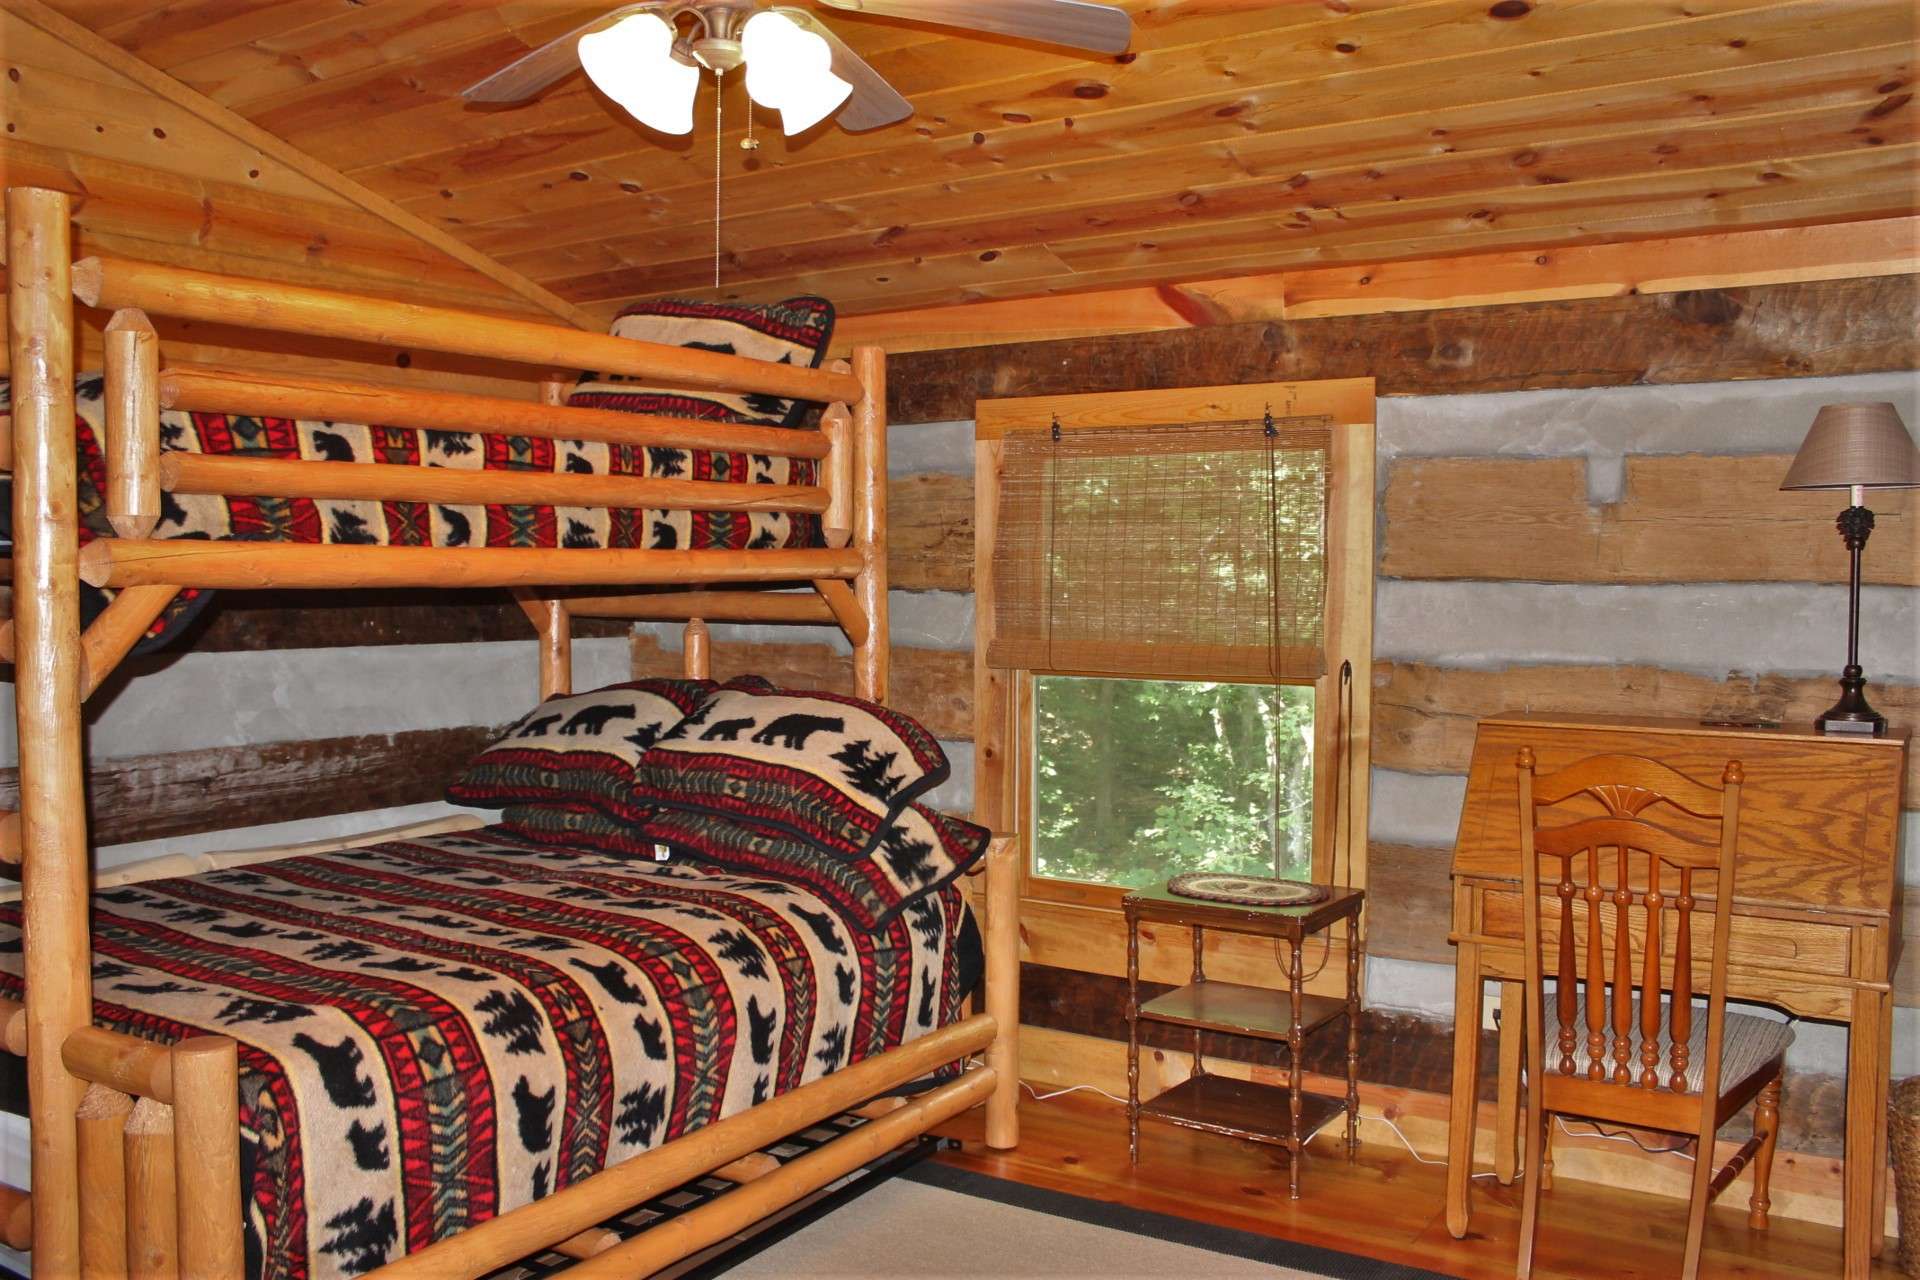 On the upper level, the loft has been enclosed to allow privacy for overnight guests.